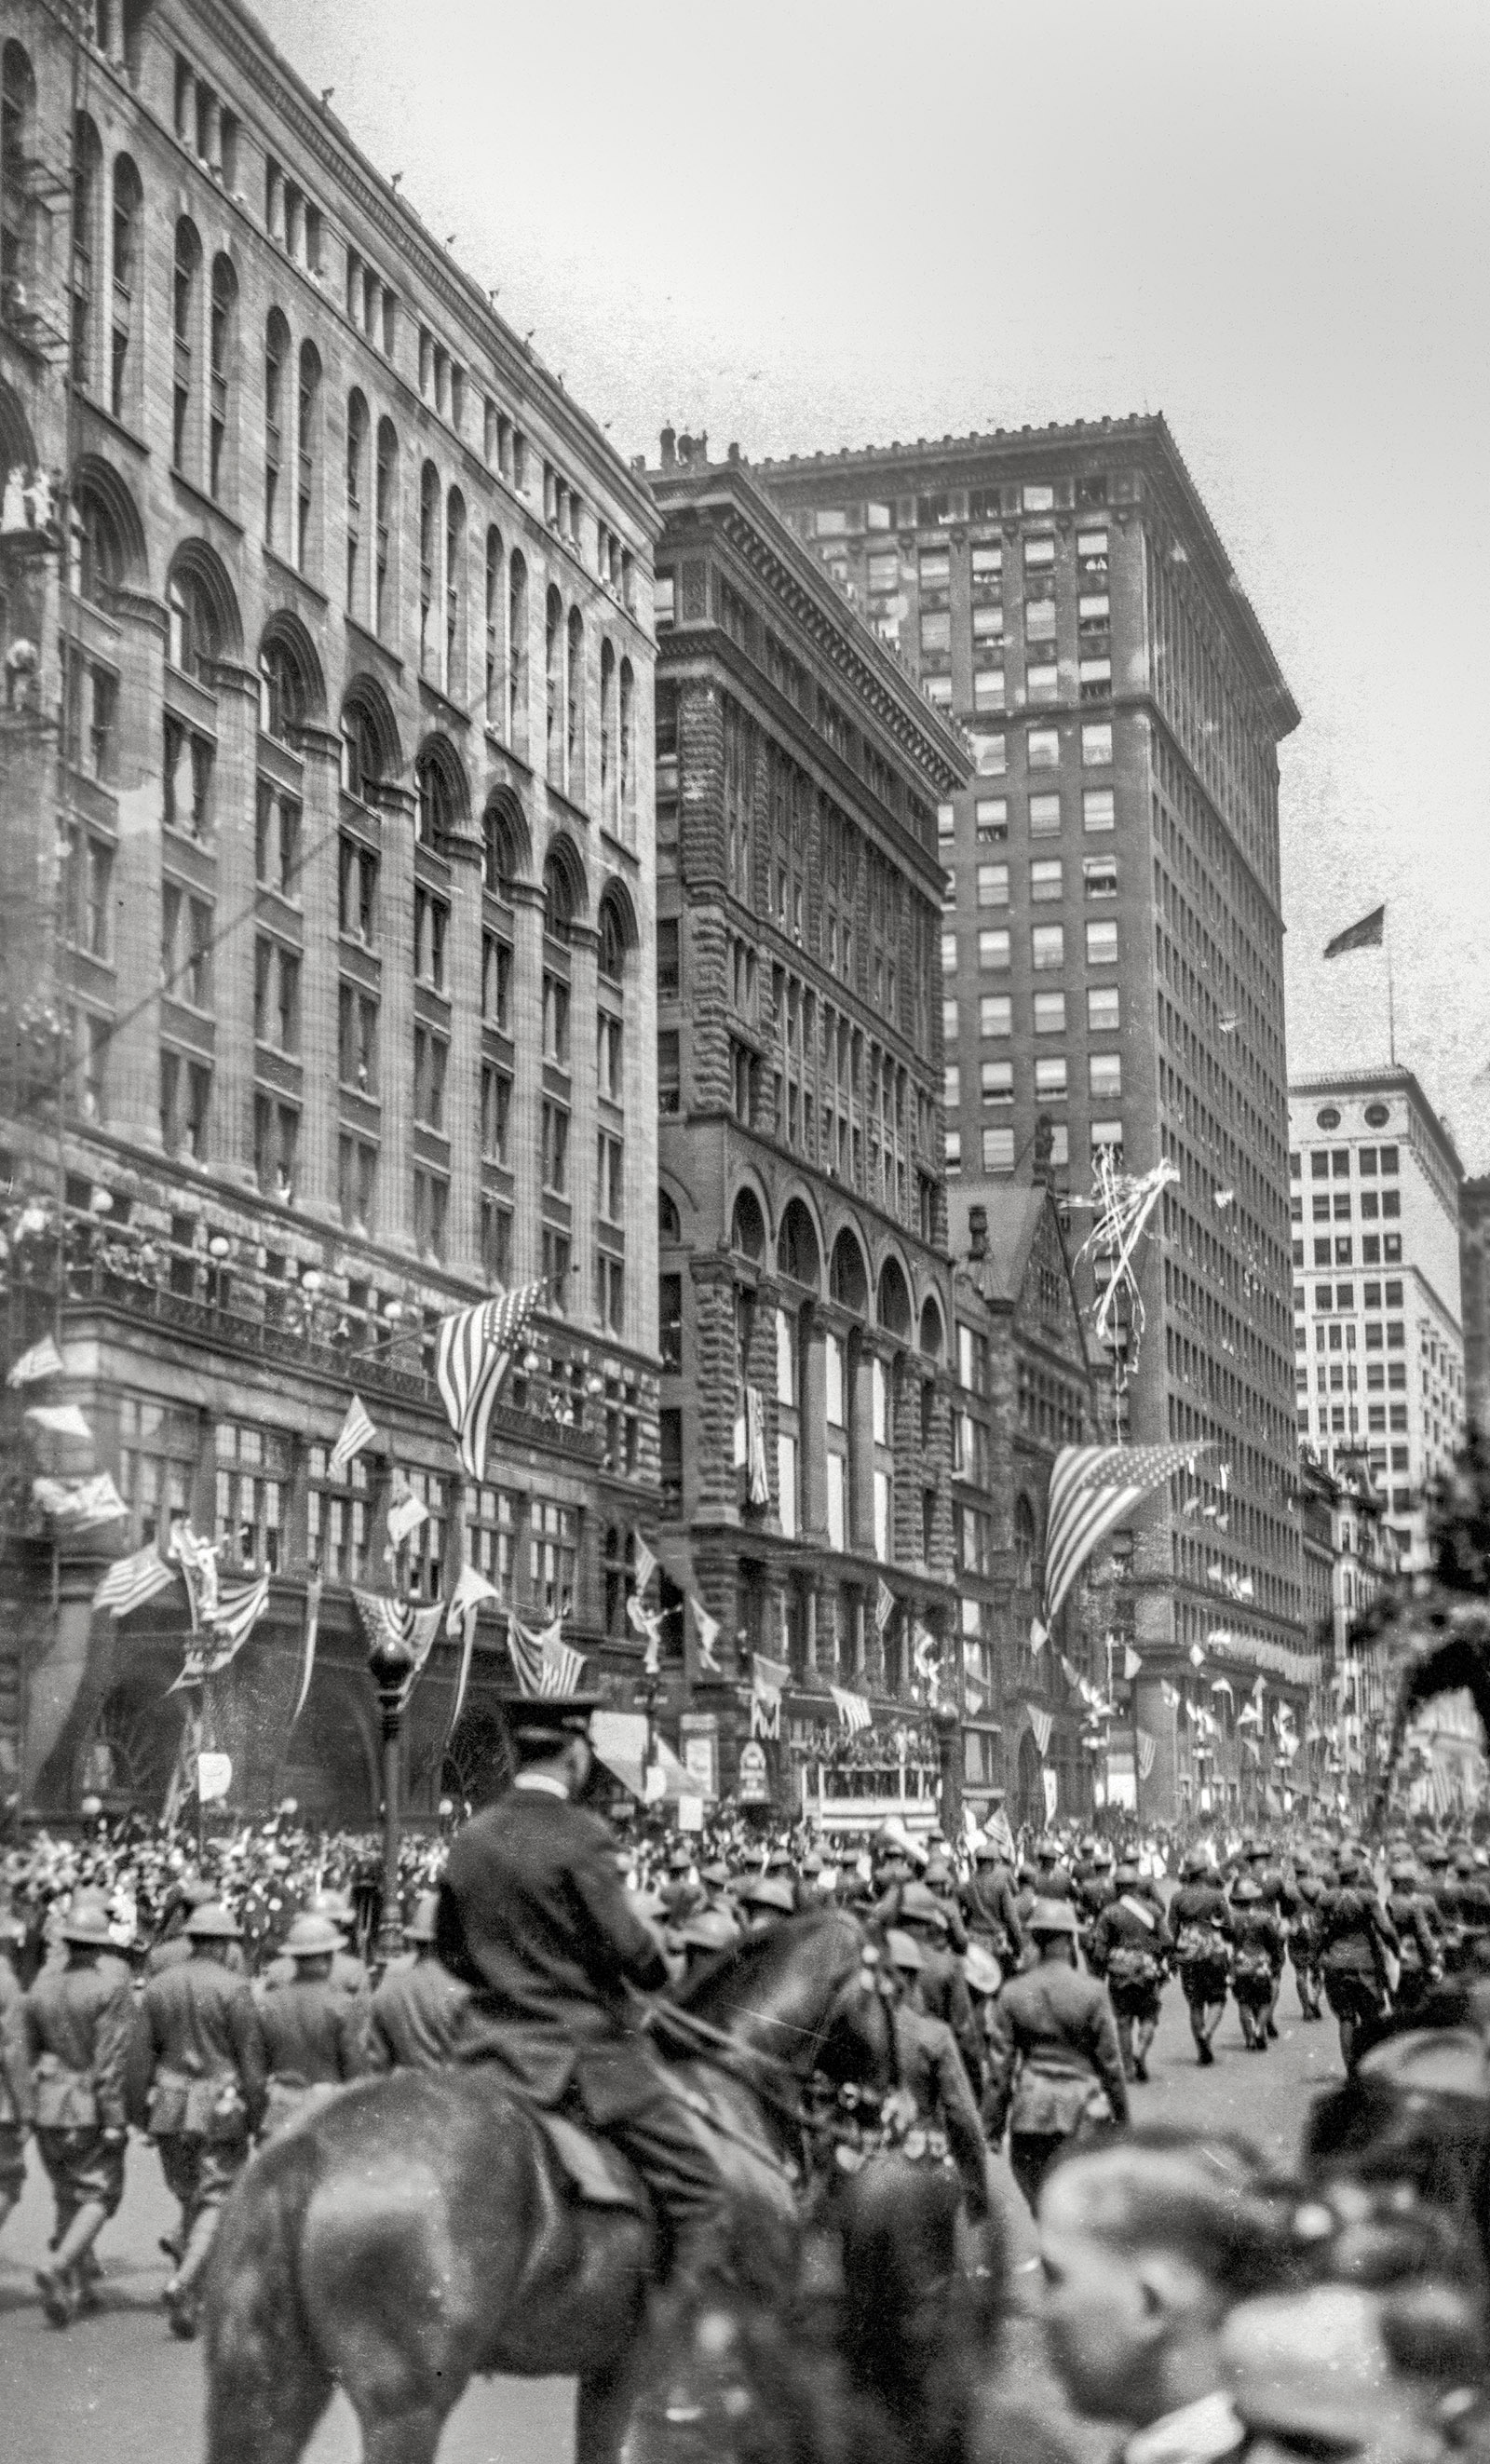 Chicago, May 12, 1919. "Return Parade for the 13th Railway Engineers, Michigan Boulevard." View full size. For another view, click here.

&nbsp; &nbsp; &nbsp; &nbsp; Thirteenth Engineers Returns to Chicago. The greatest reception given to any organization of returning soldiers at Chicago was given to the 13th Railway Engineers on May 12. Its welcome to its home town was unequaled in point of enthusiasm and spectacular expression in the after war history of the city. Approximately 100,000 people banked Michigan Boulevard on both sides and maintained a bedlam of noise as the regiment paraded in platoon formation. Employees of the six railroads centering in Chicago from which the 13th Engineers was mainly recruited were organized in groups along Michigan Boulevard to welcome the men.
-— Railway Age and Railway Review, 1919

During World War I, the regiment known as the 13th Engineers consisted of personnel from the six largest railroads that ran through Chicago; it operated about 142 kilometers of French railways, serving the Verdun-St. Mihiel, Champagne-Marne, and Meuse Argonne sections. The scan is from a family photo album titled "My Vacation Days," with dates ranging from 1914 to 1922.